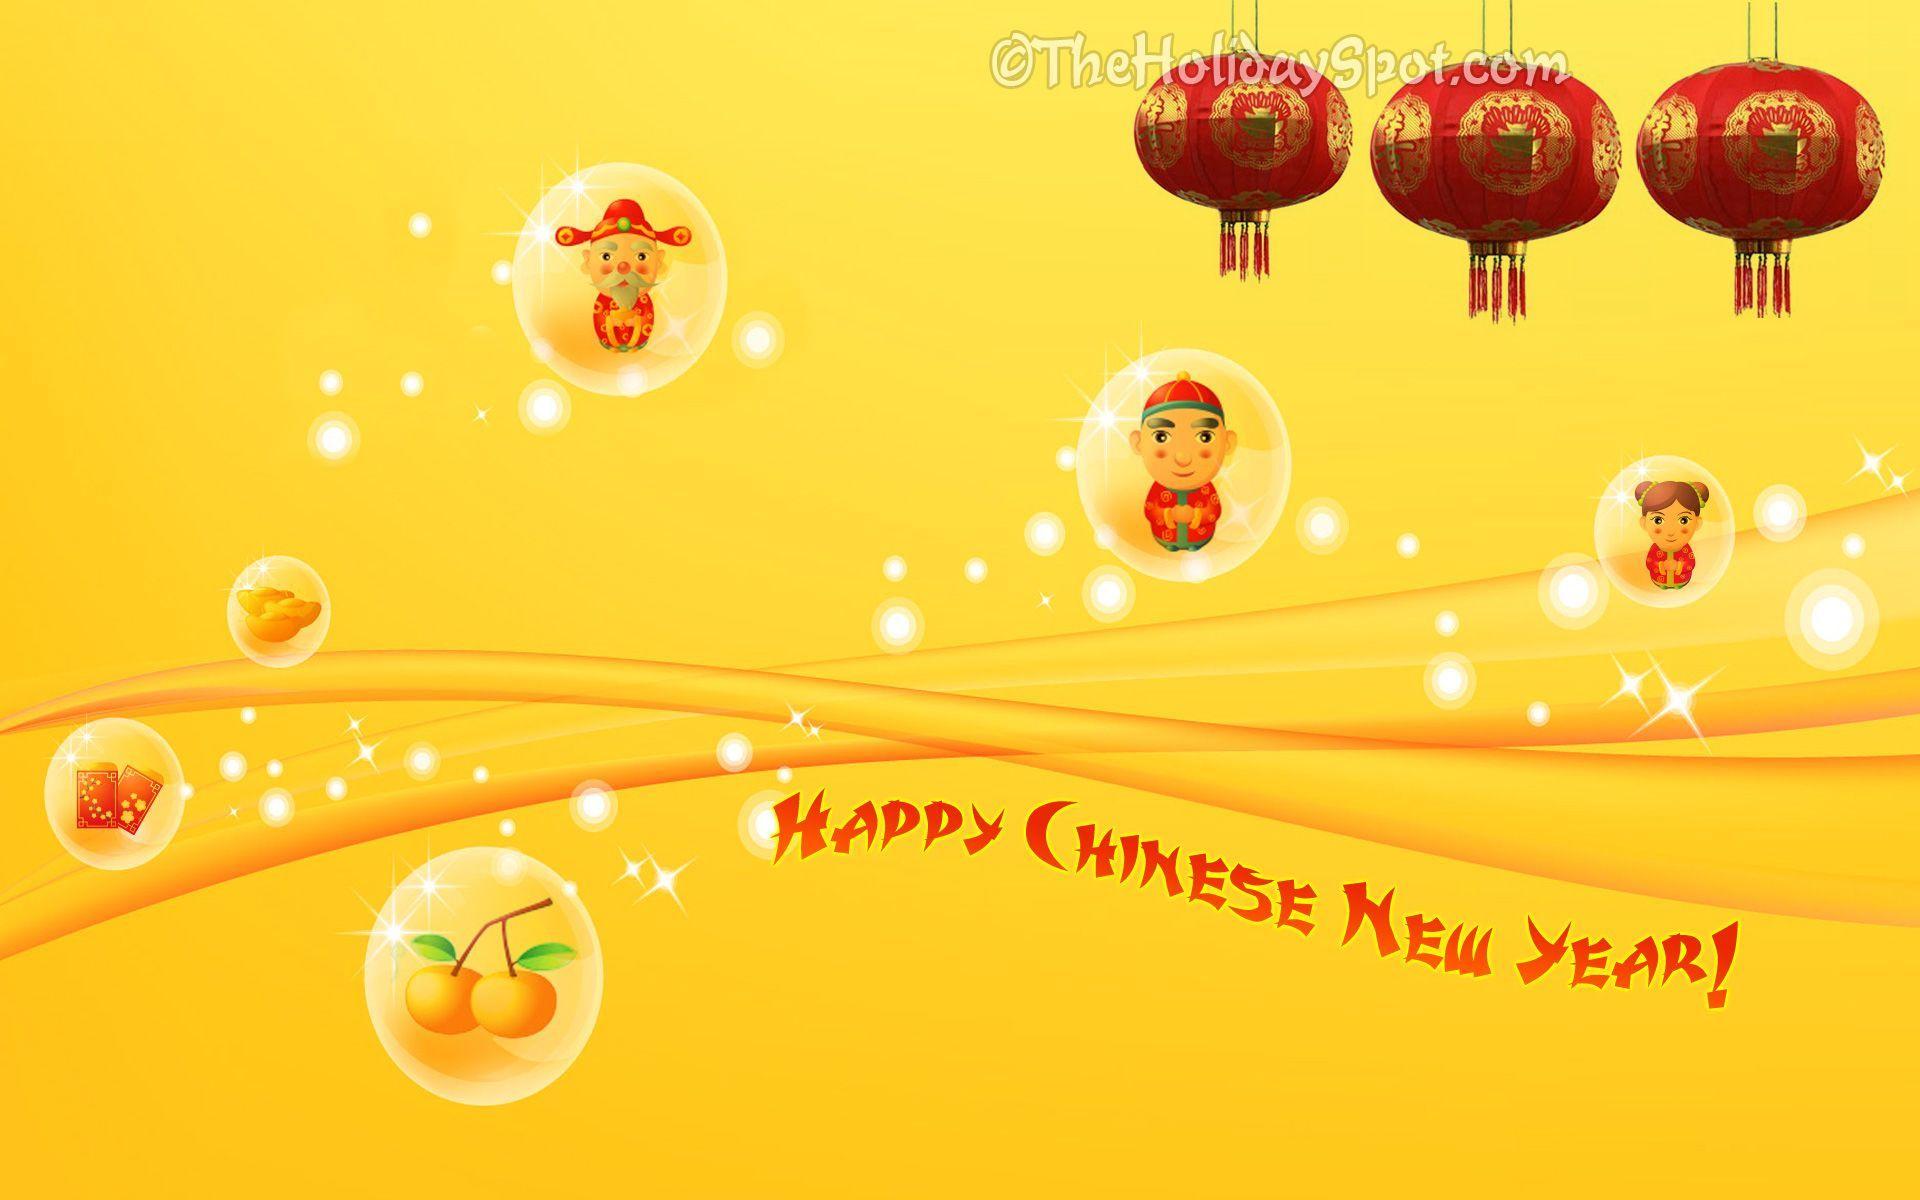 Cute Chinese New Year Wallpaper for desktop. Chinese New Year